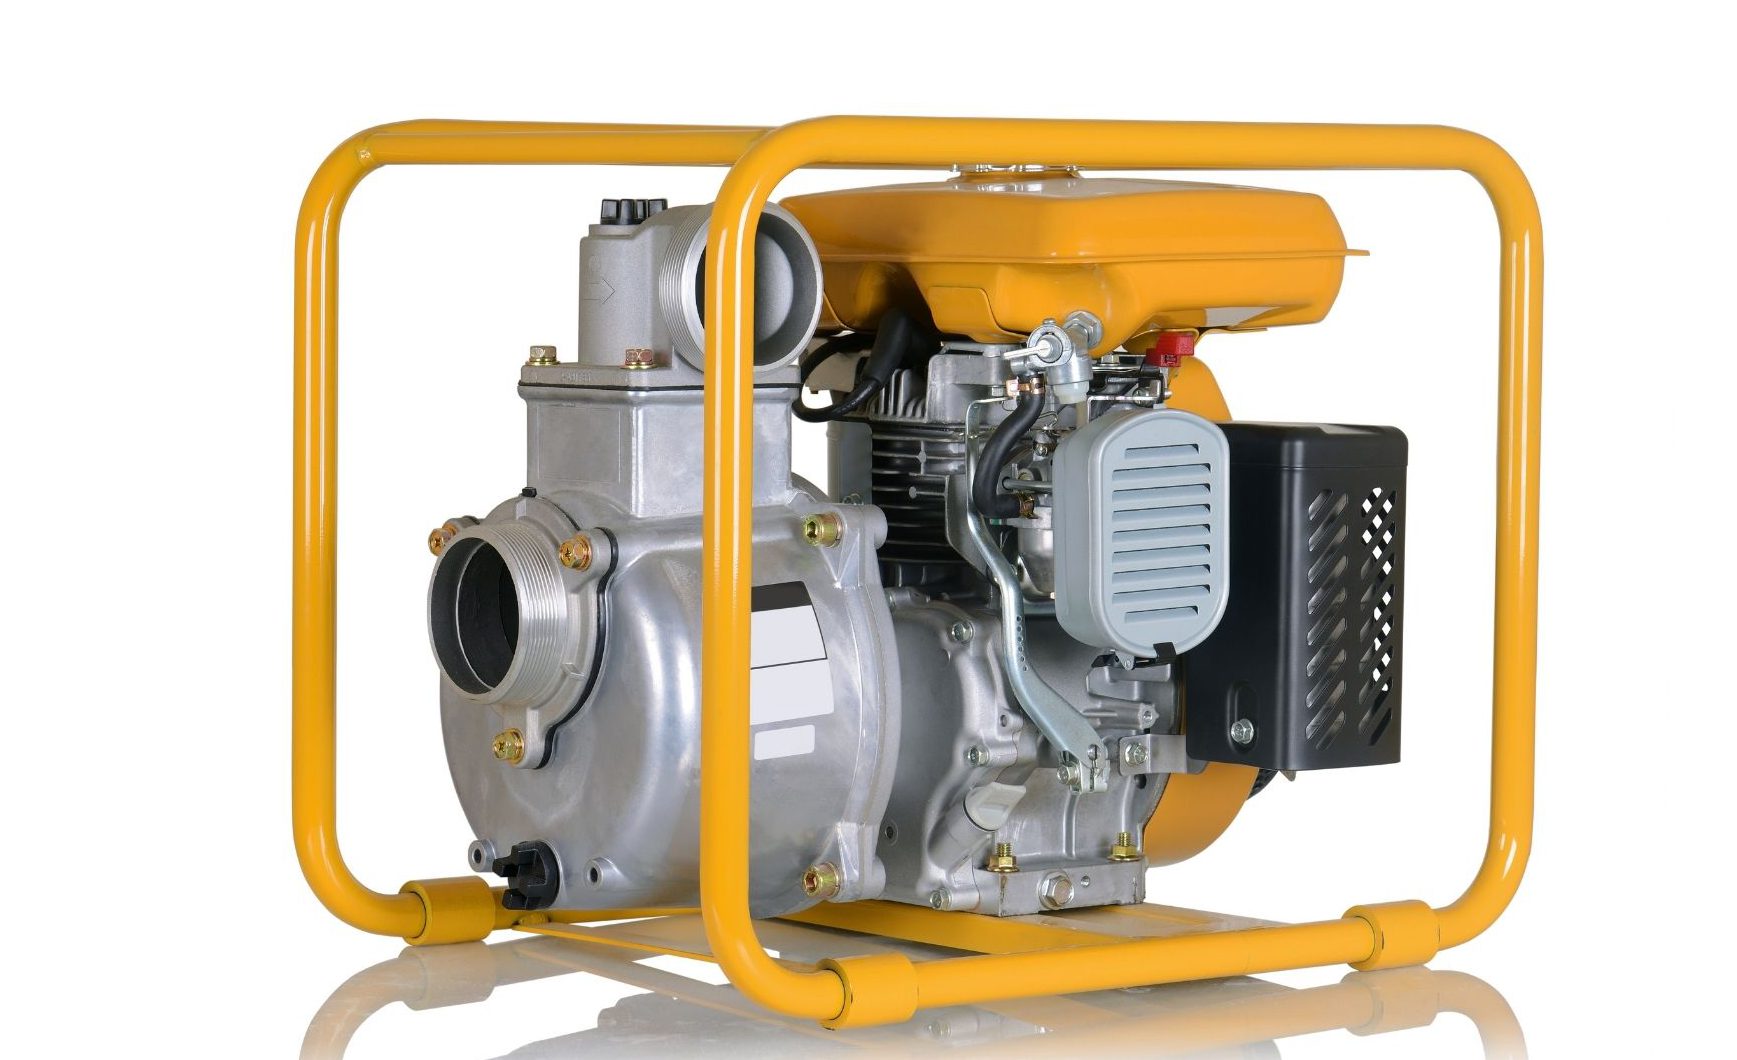 Global Small Gas Engine Market Outlook, Opportunities And Strategies – Includes Small Gas Engine Market Growth